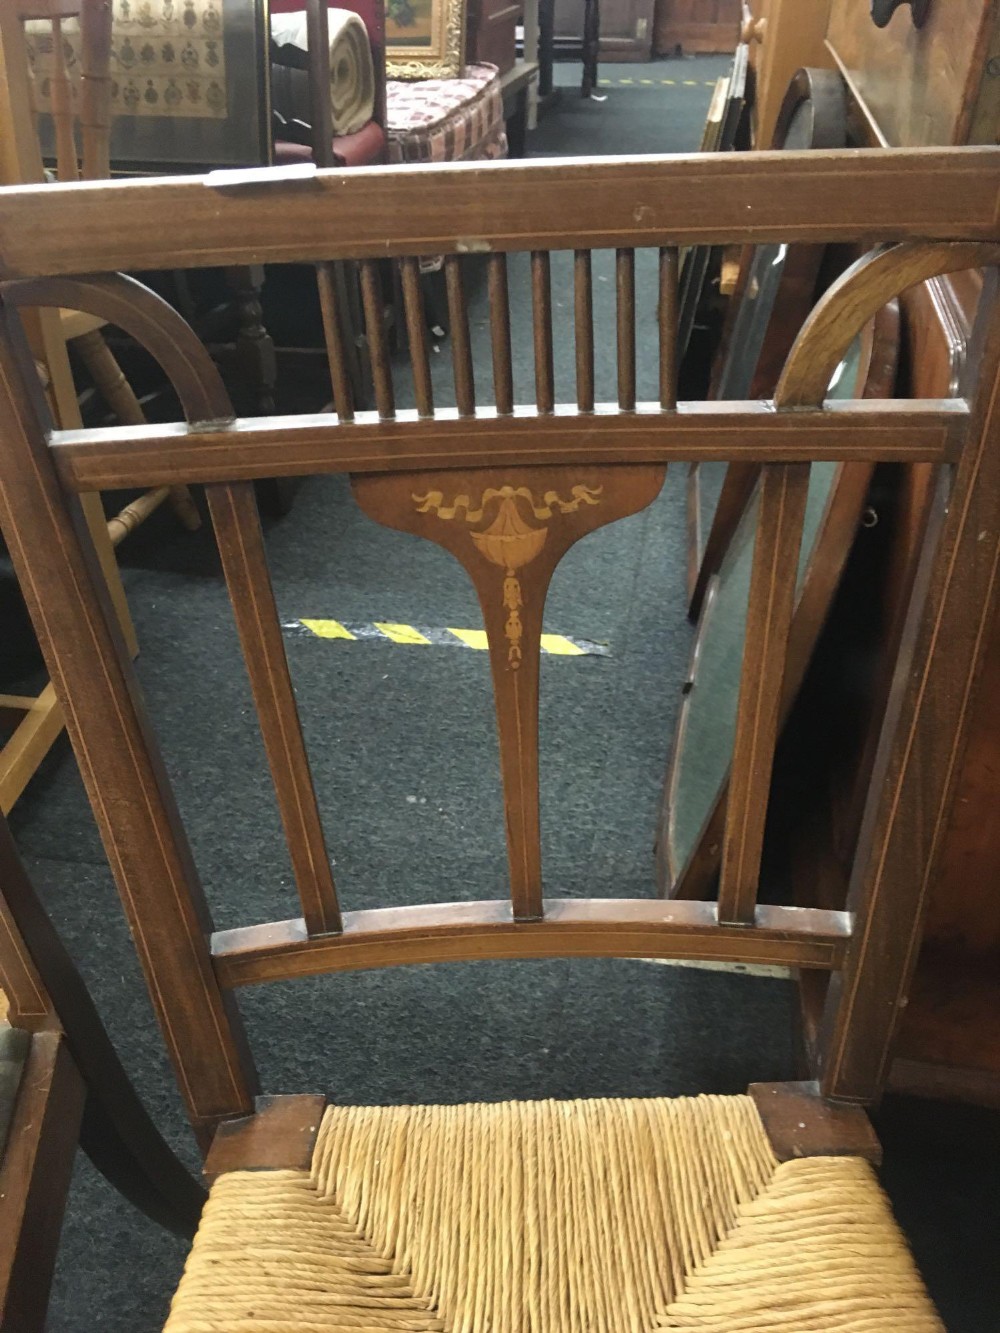 2 UNUSUAL INLAID CHAIRS, 1 UPHOLSTERED & 1 STRING SEATED - Image 2 of 4